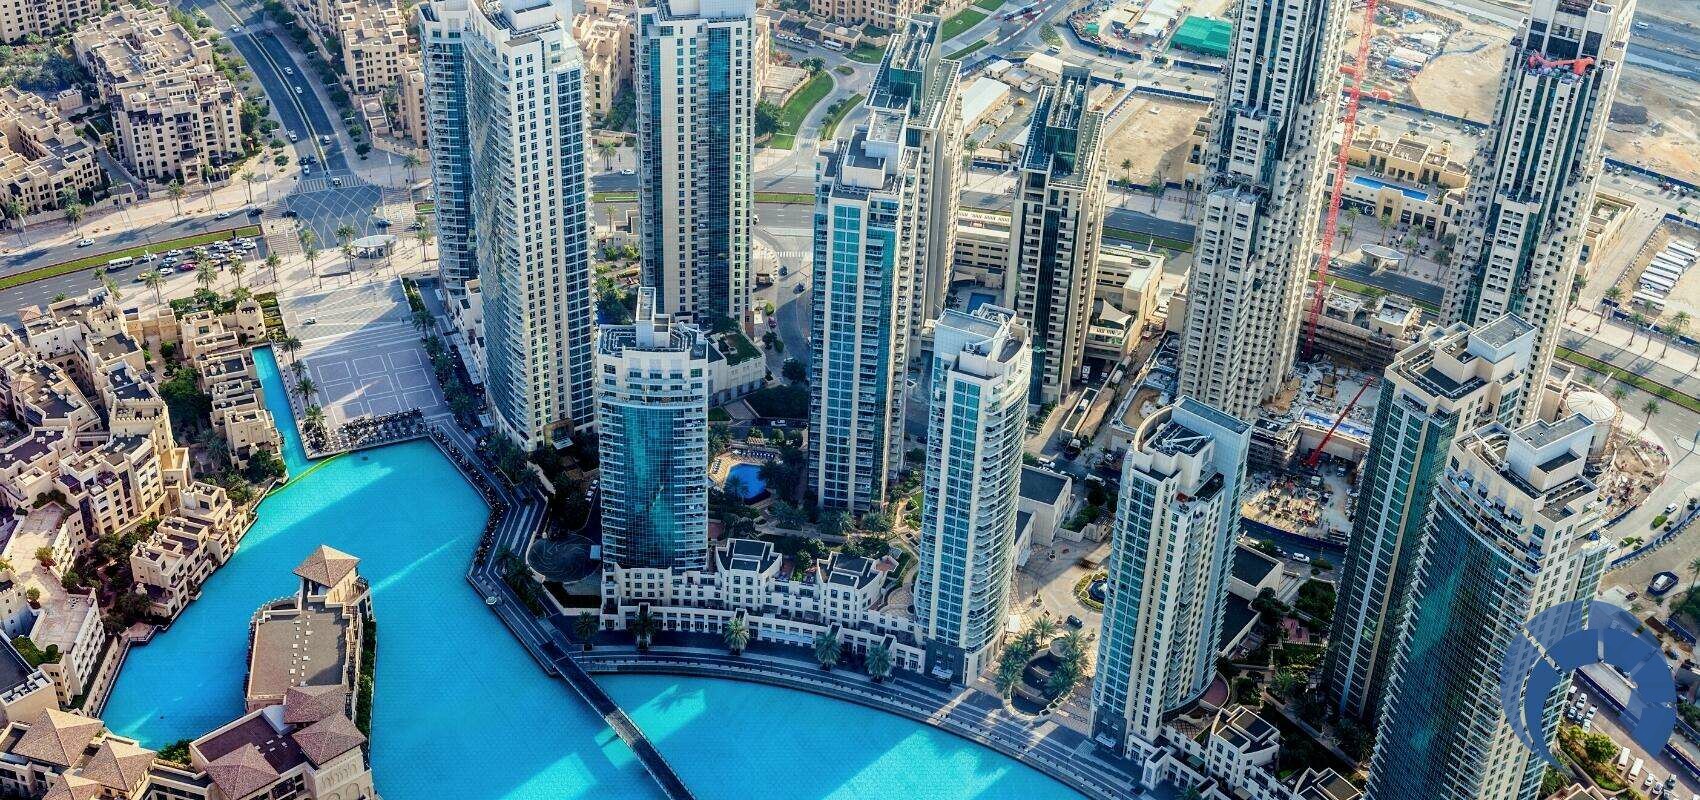 An aerial view of a modern cityscape with high-rise buildings surrounding a large blue pool. The area features contemporary architecture, lush greenery, and well-planned infrastructure. Several roads and smaller structures can be seen in the background—an ideal scene to invest in Dubai's real estate. | MONEY6X